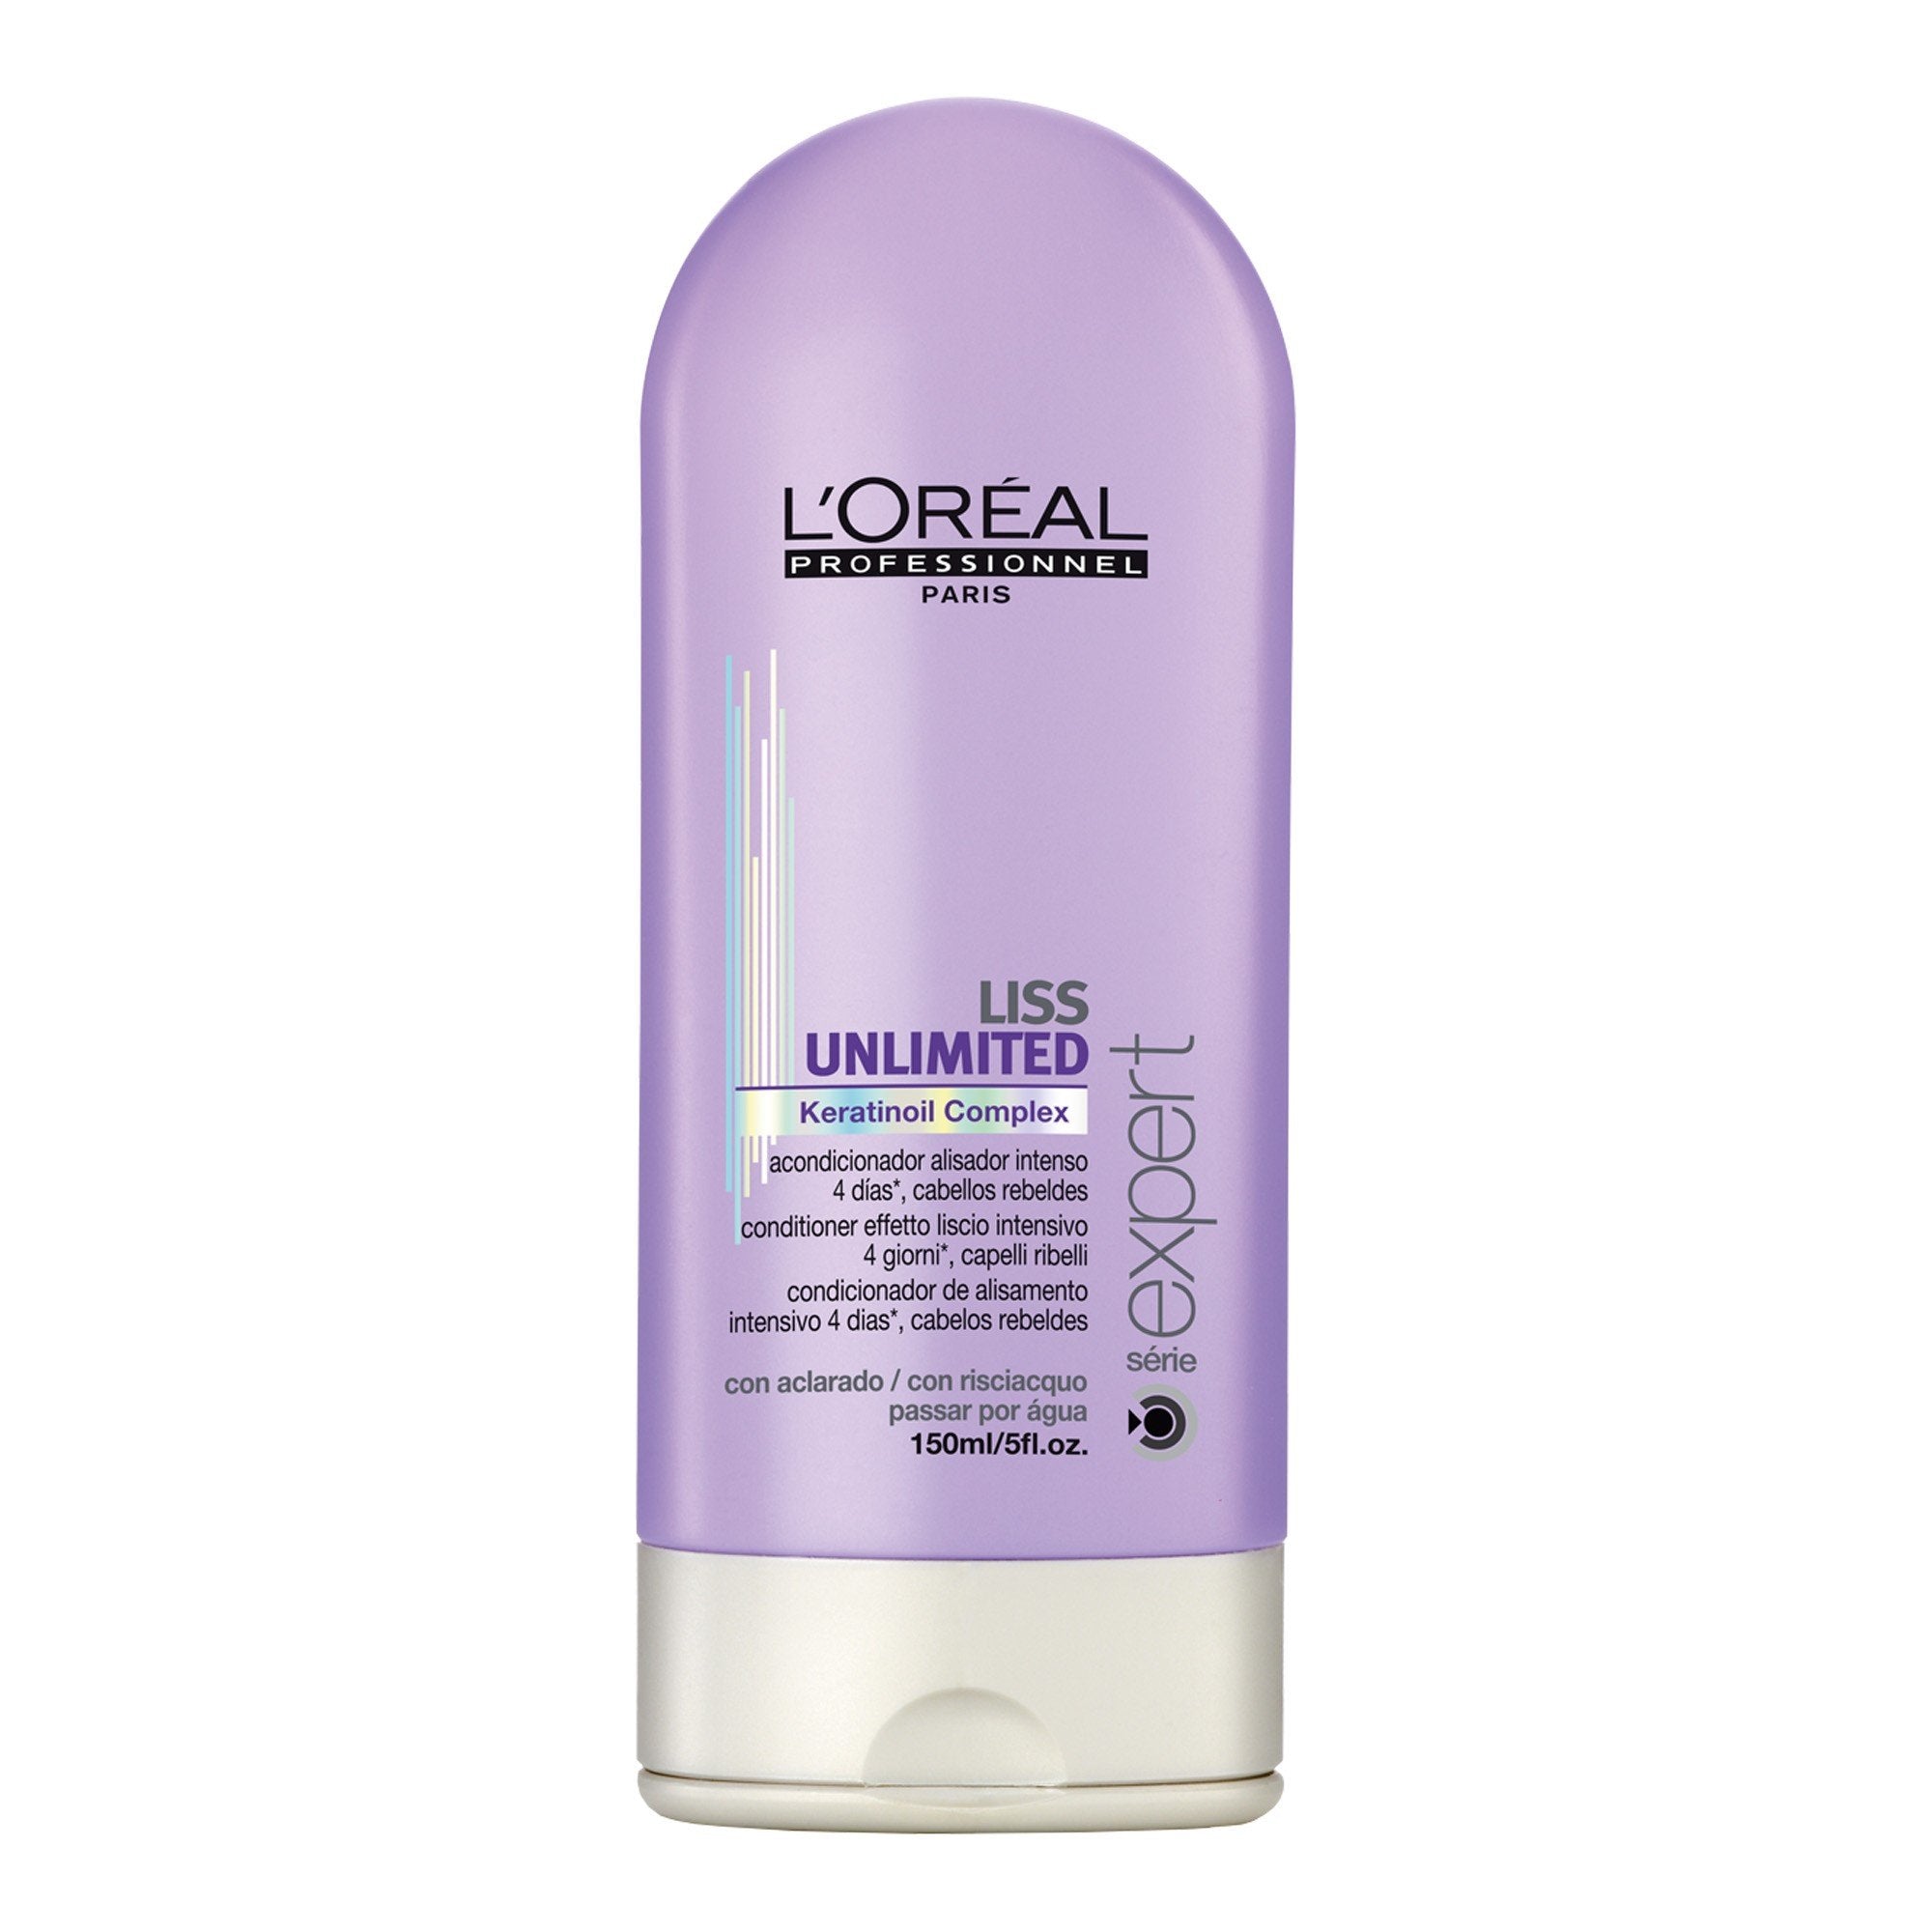 LOREAL Liss Unlimited Keratinoil Complex Smoothing Conditioner 5 oz